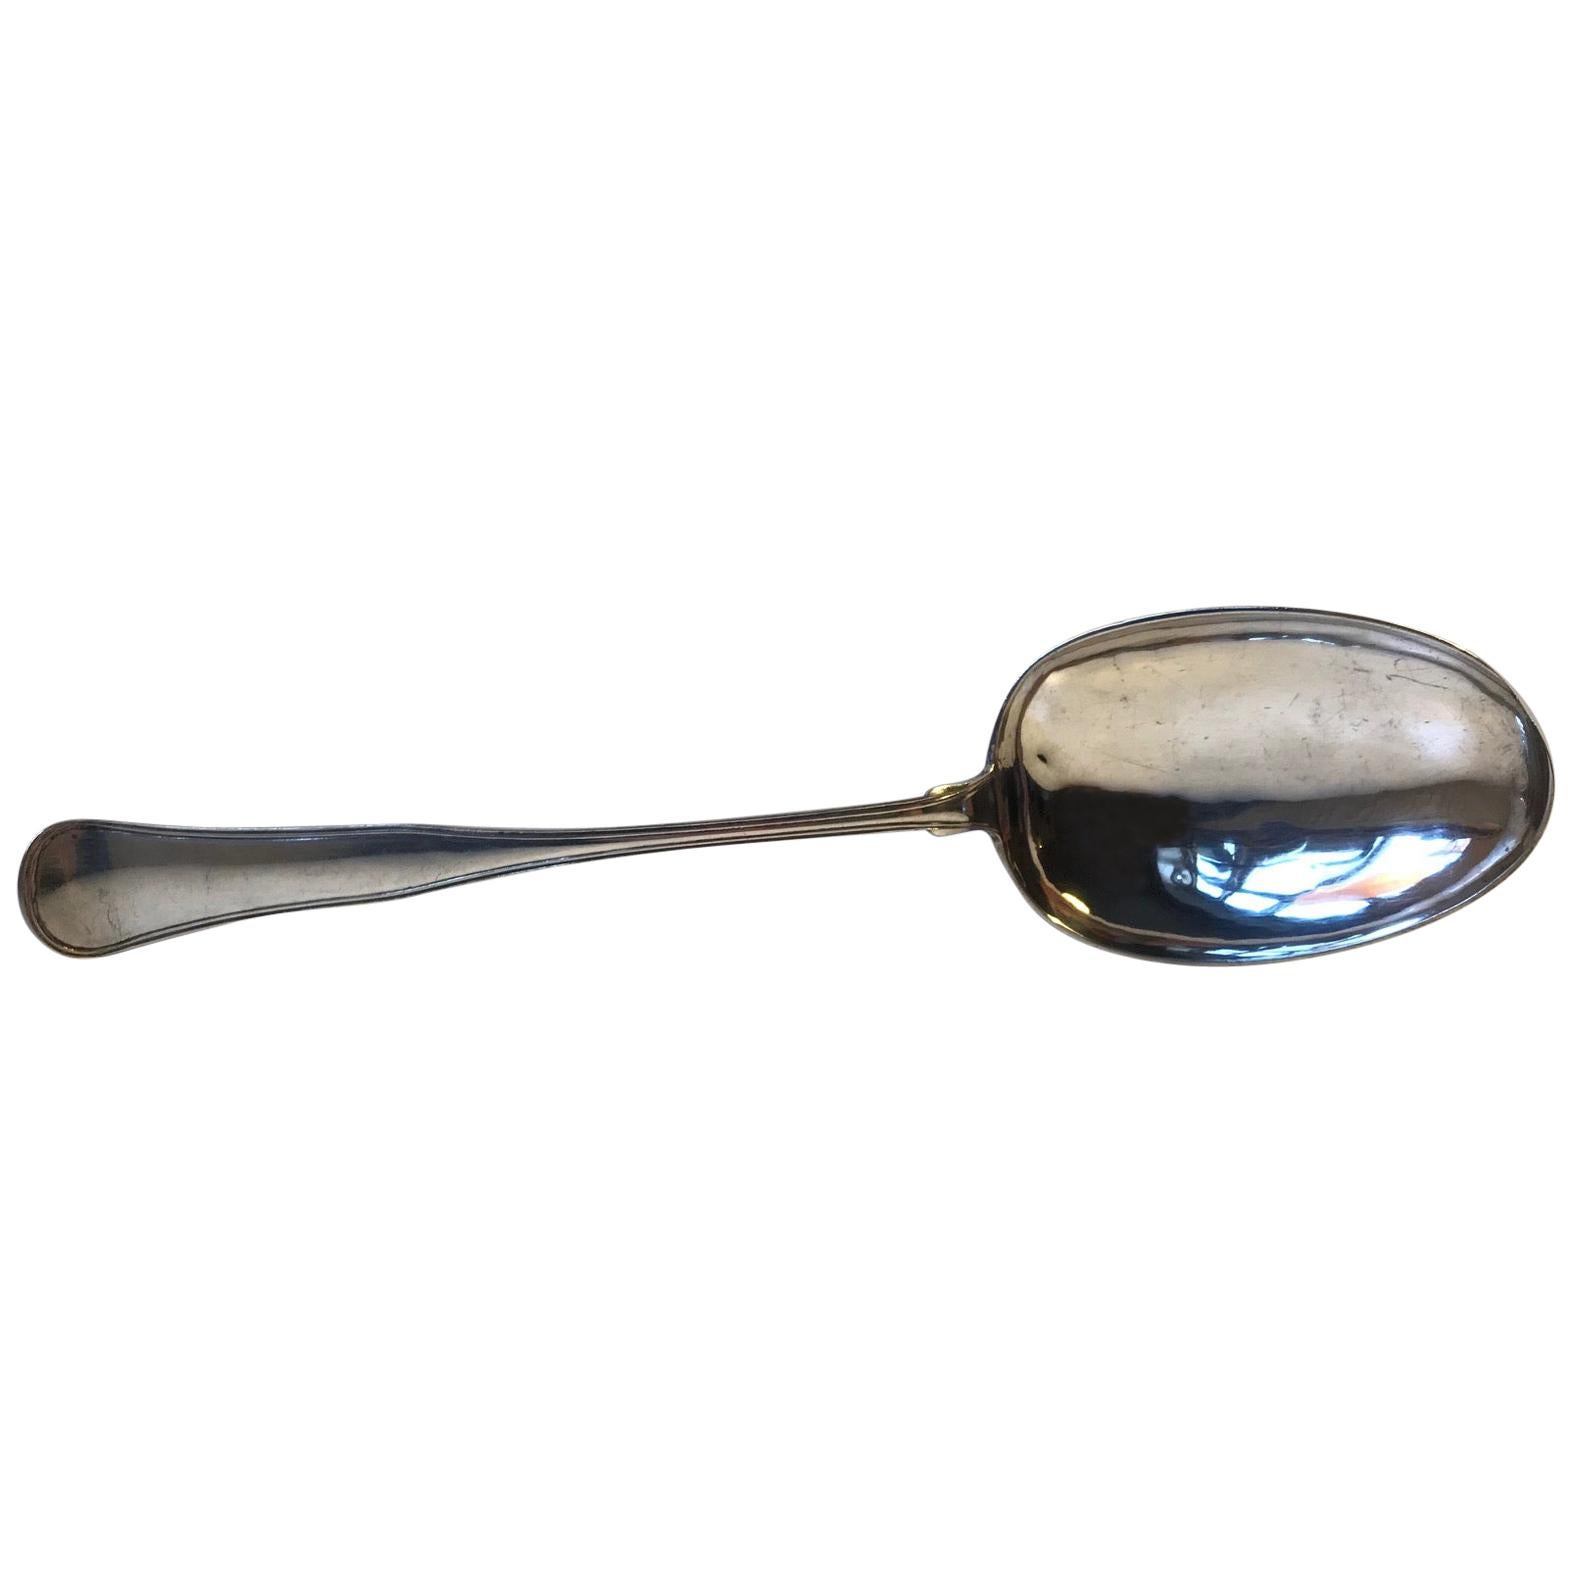 Large Antique Danish Silver Serving Spoon by Funck, 19th Century For Sale